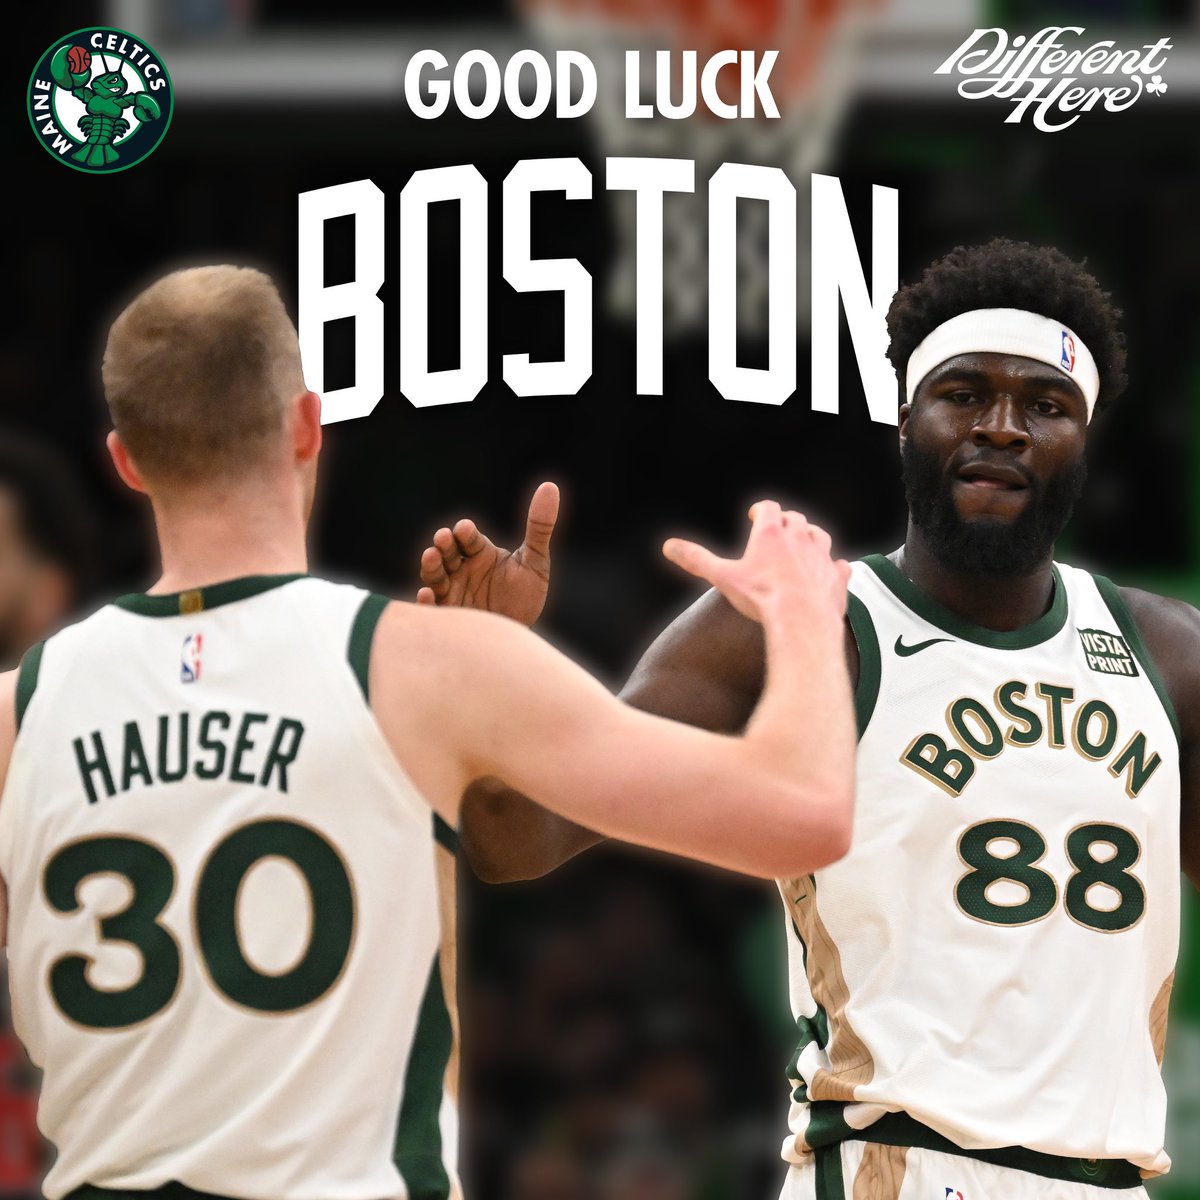 Time to go get 1️⃣8️⃣ Good luck to the @celtics in the playoffs! #DifferentHere